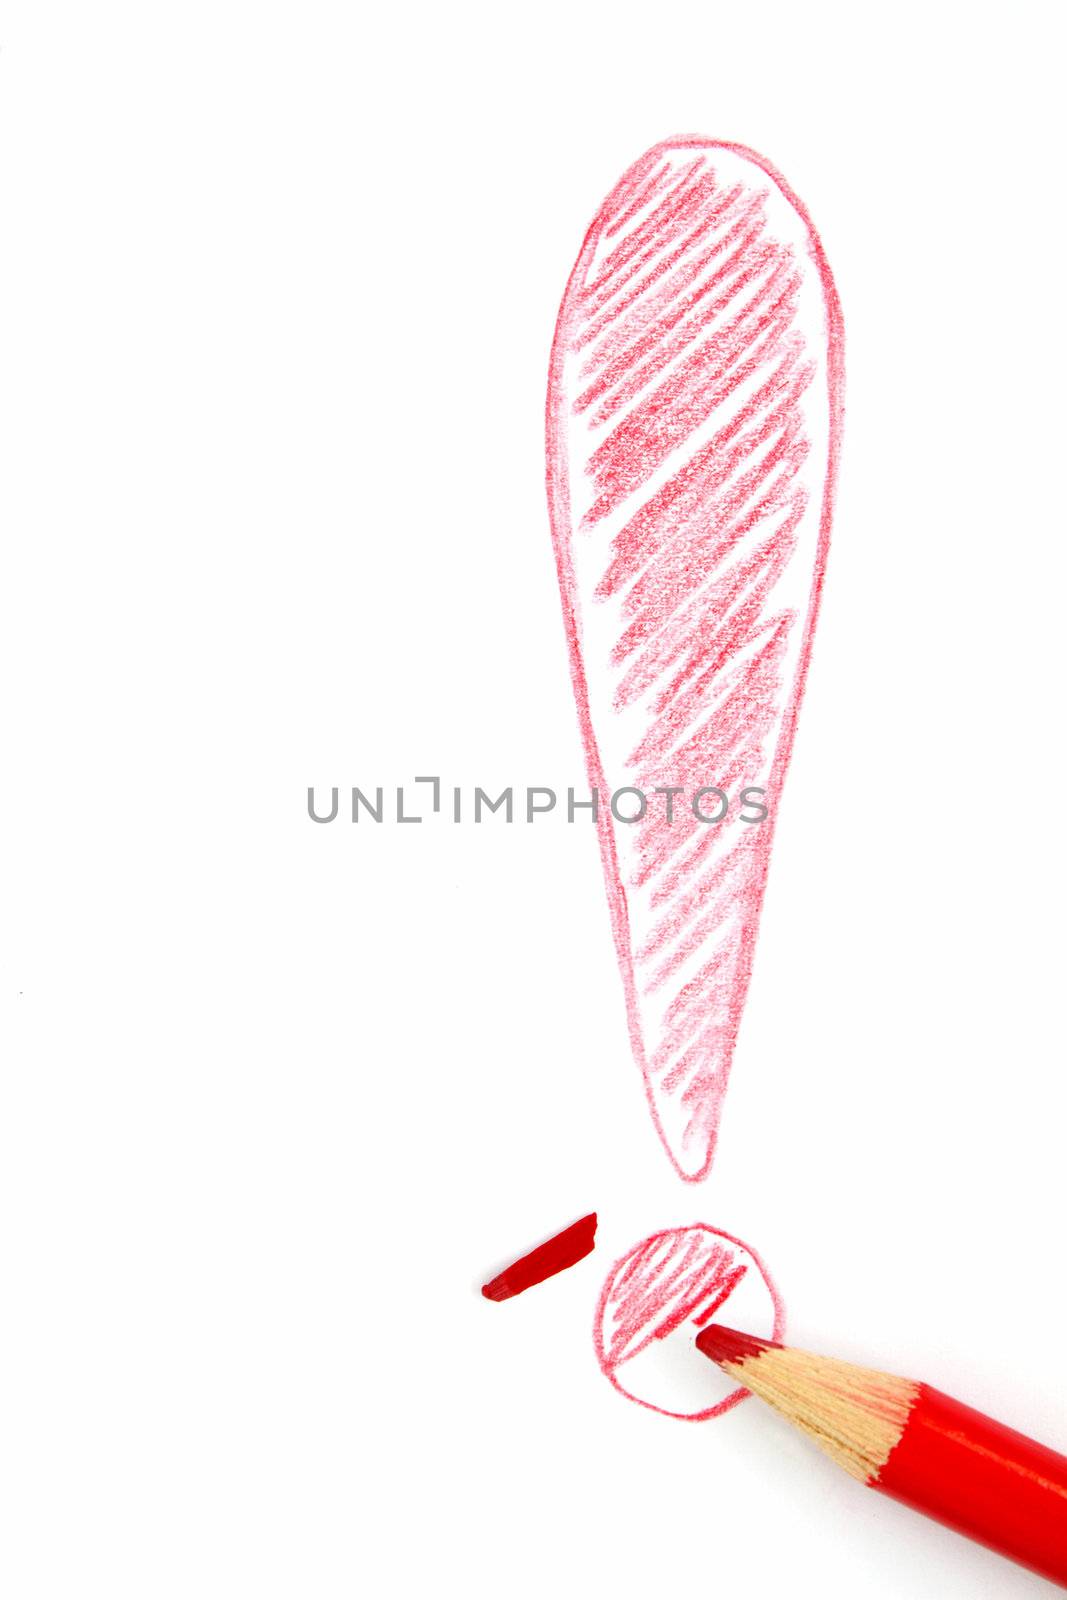 Drawing of red exclamation mark and broken pencil by pulen